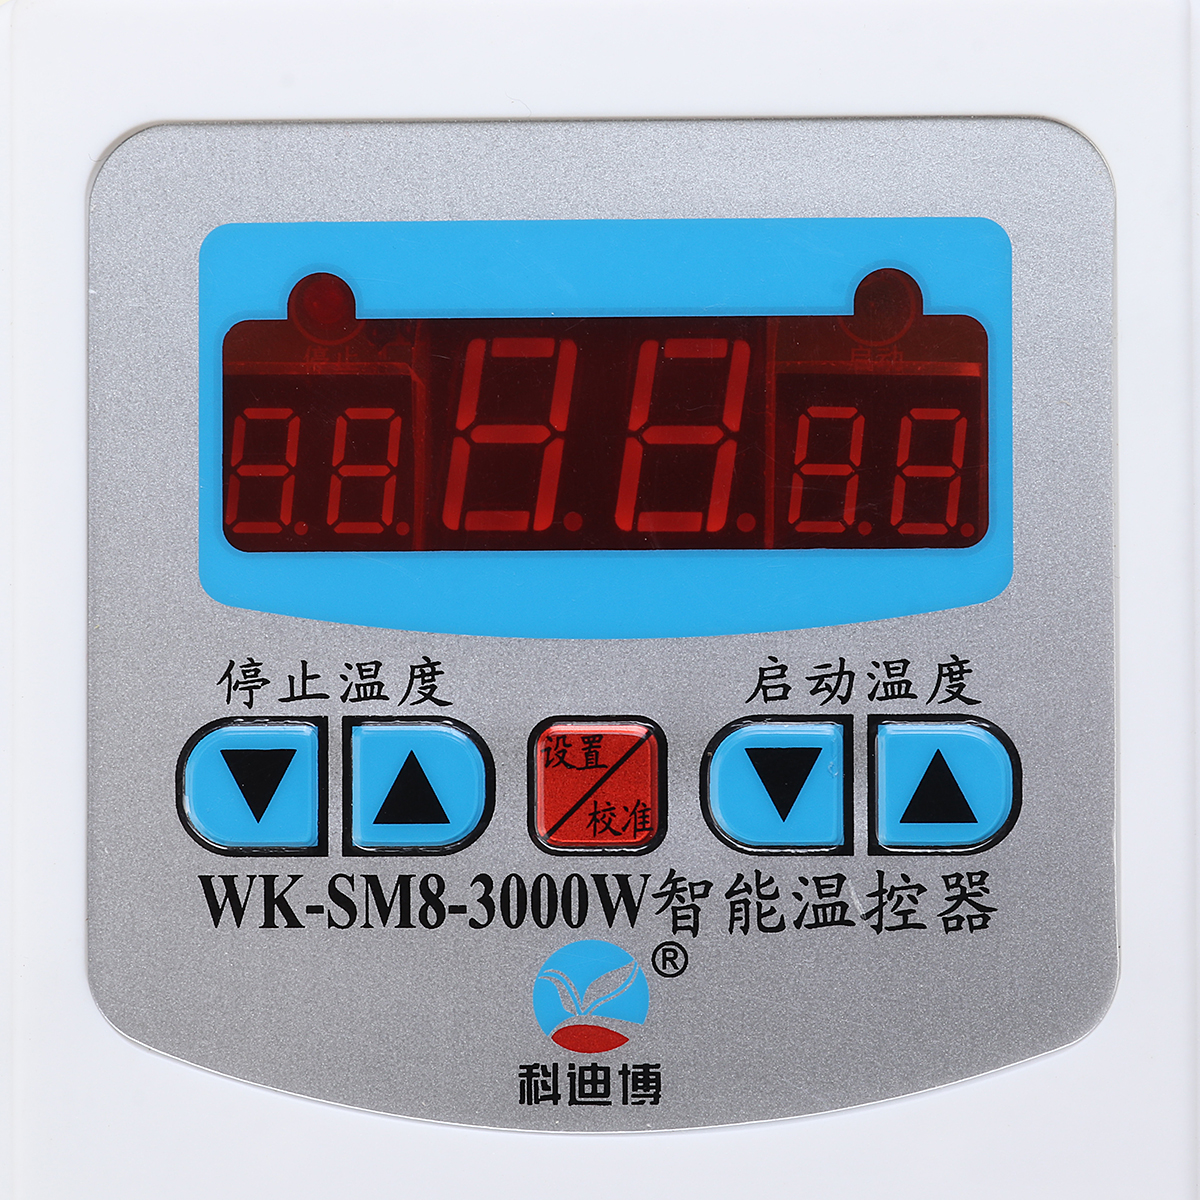 Find WK SM8 3000W Smart Thermostat Digital Display Microcomputer Intelligent Thermostat Temperature Controller for Sale on Gipsybee.com with cryptocurrencies